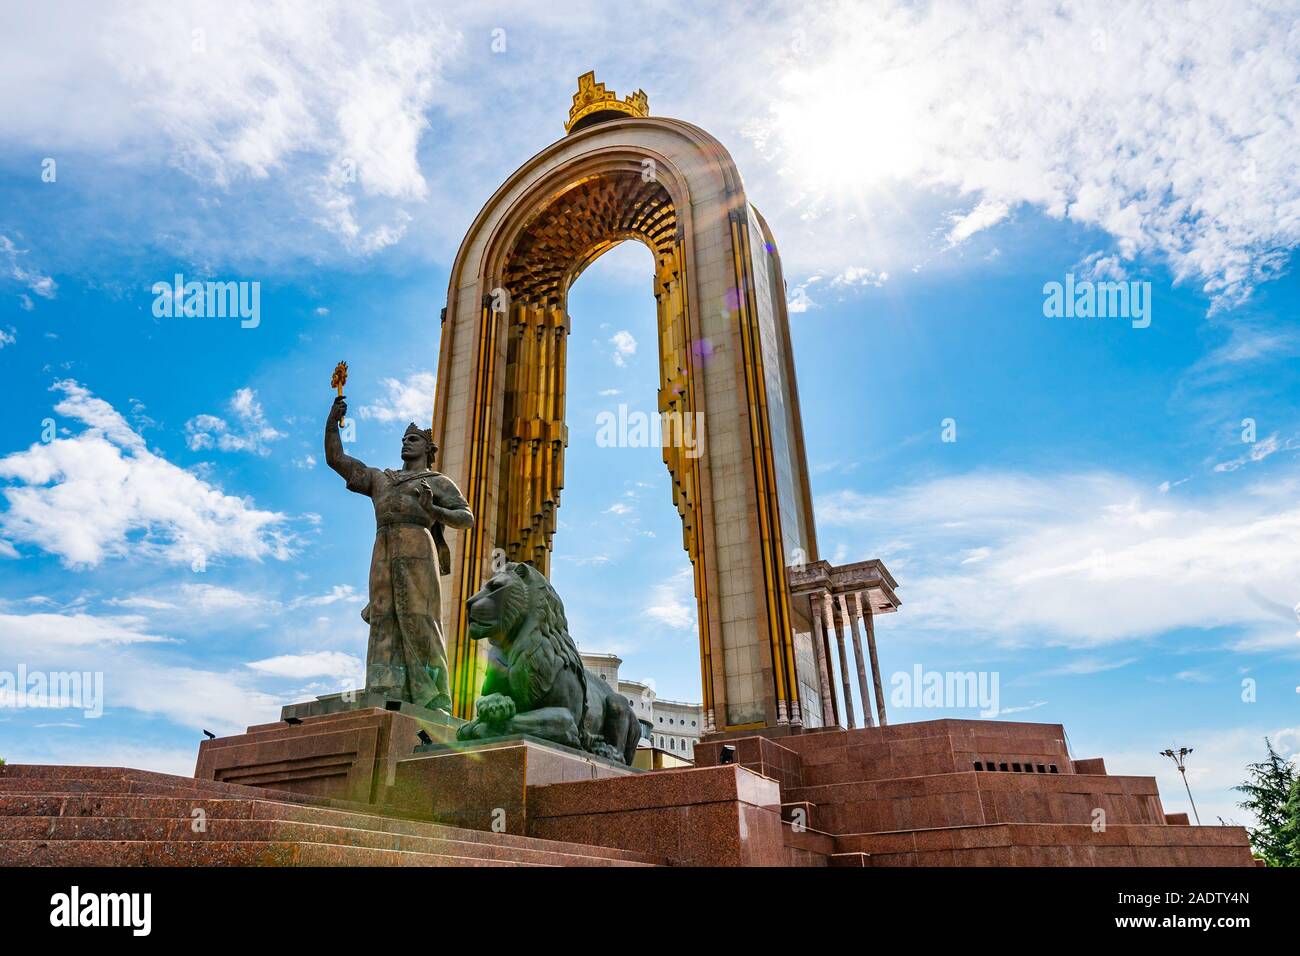 Dushanbe Ismoil Somoni Holding with his Right Hand a Scepter Statue Picturesque View on a Sunny Blue Sky Day Stock Photo